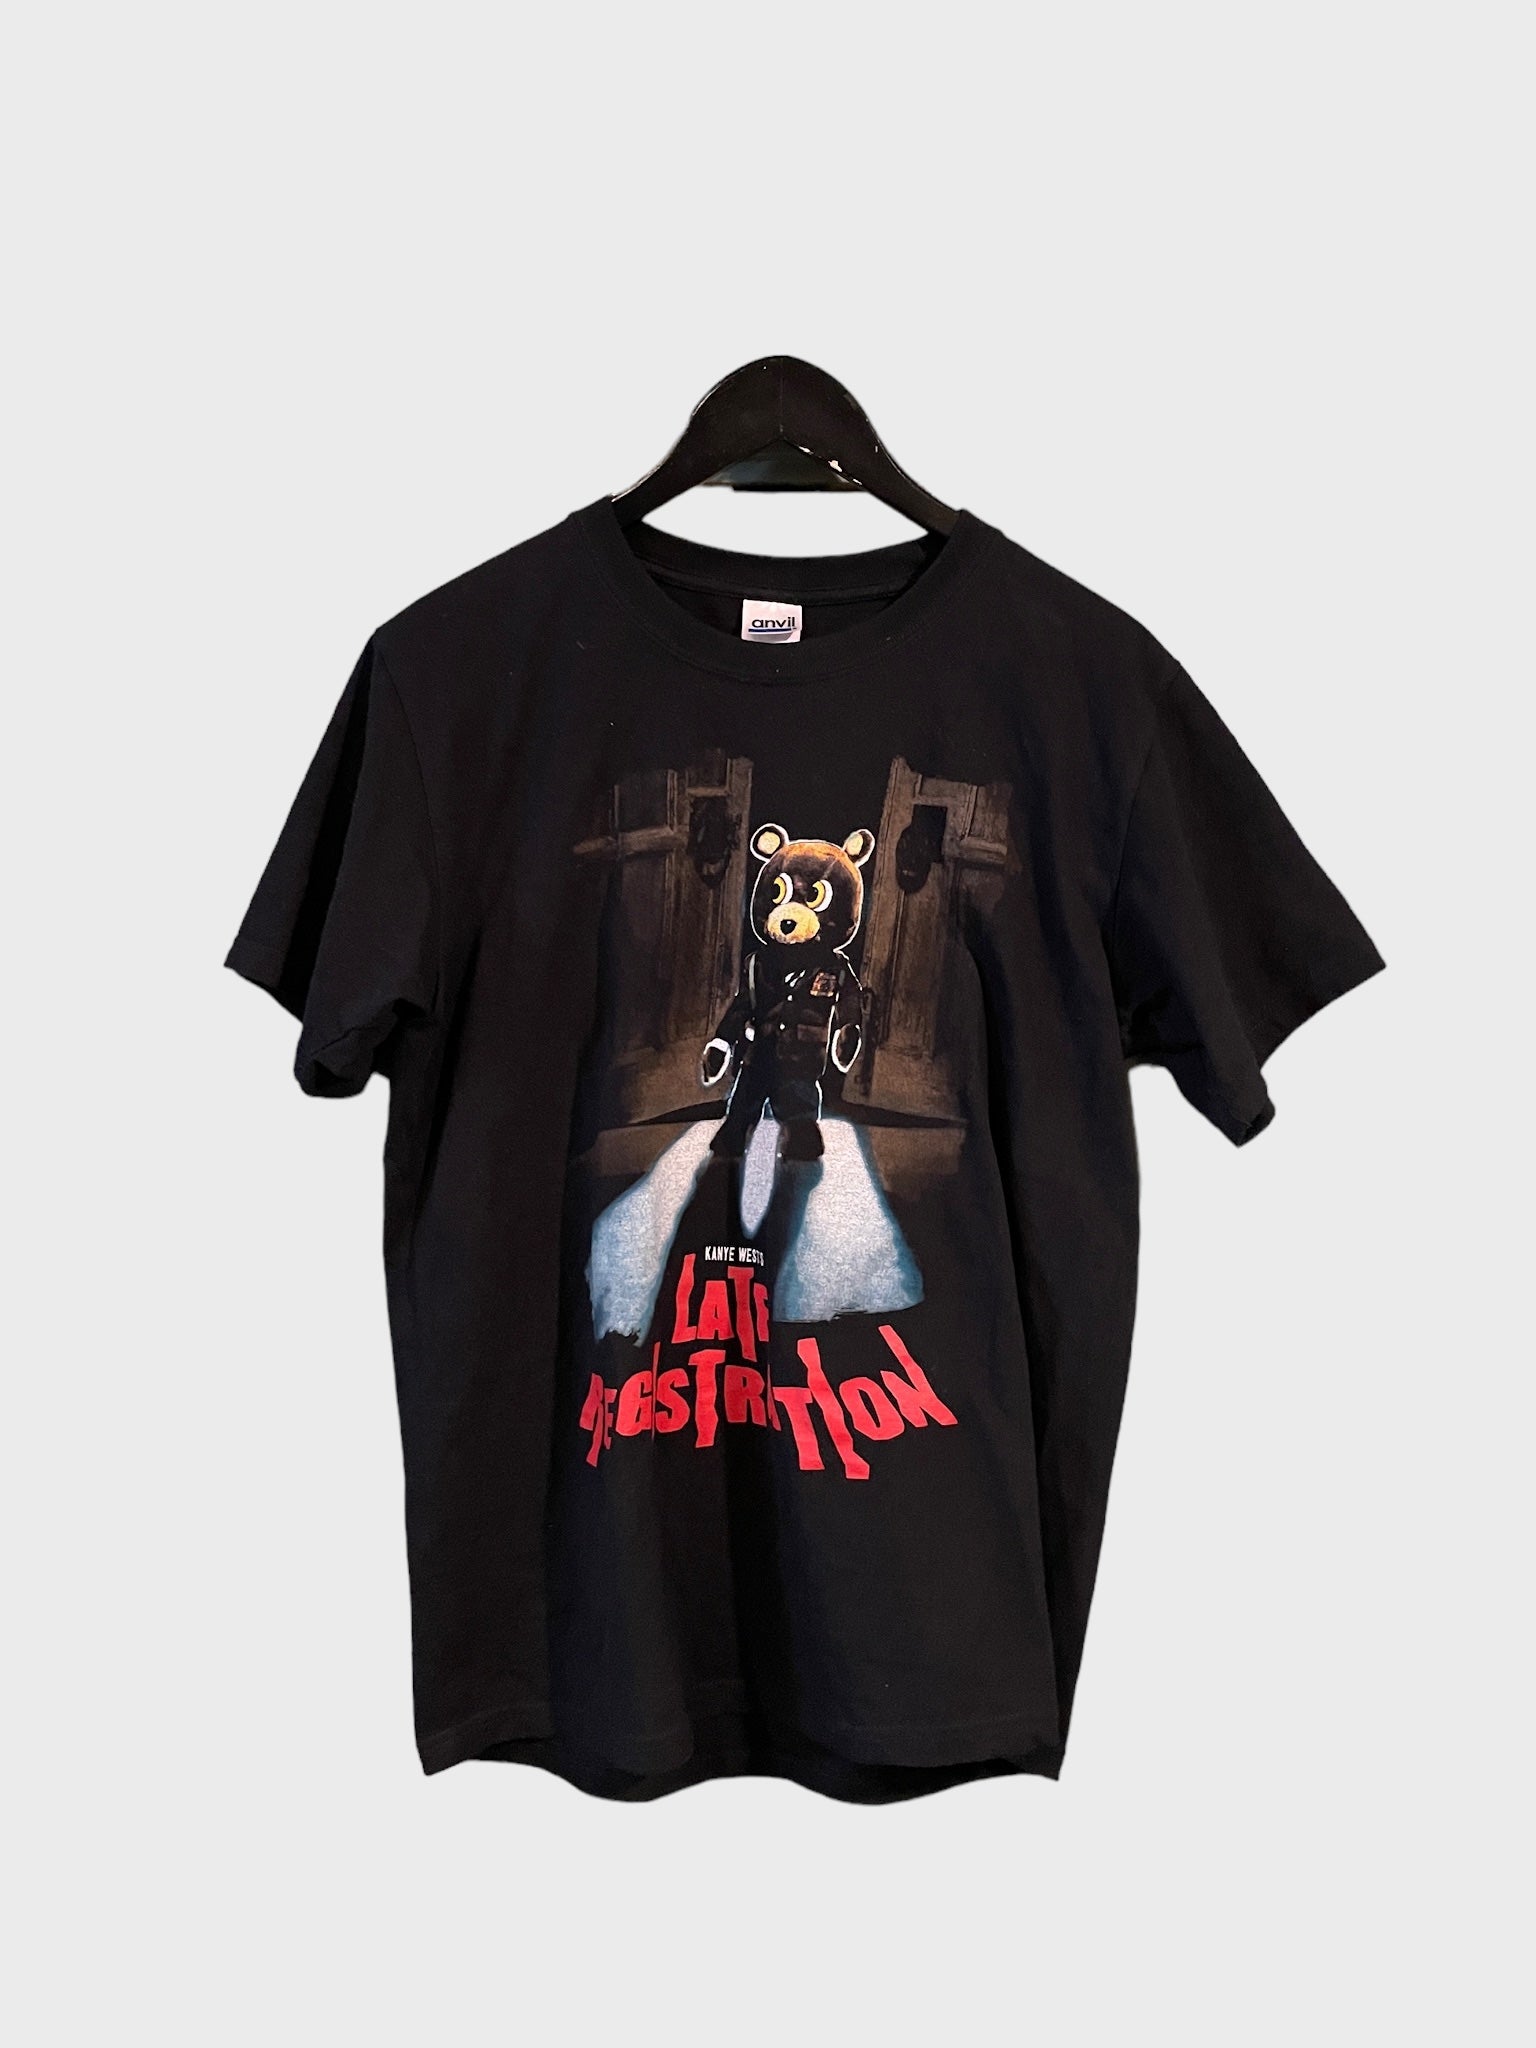 Kanye West 2005 Touch The Sky Tour T-shirt